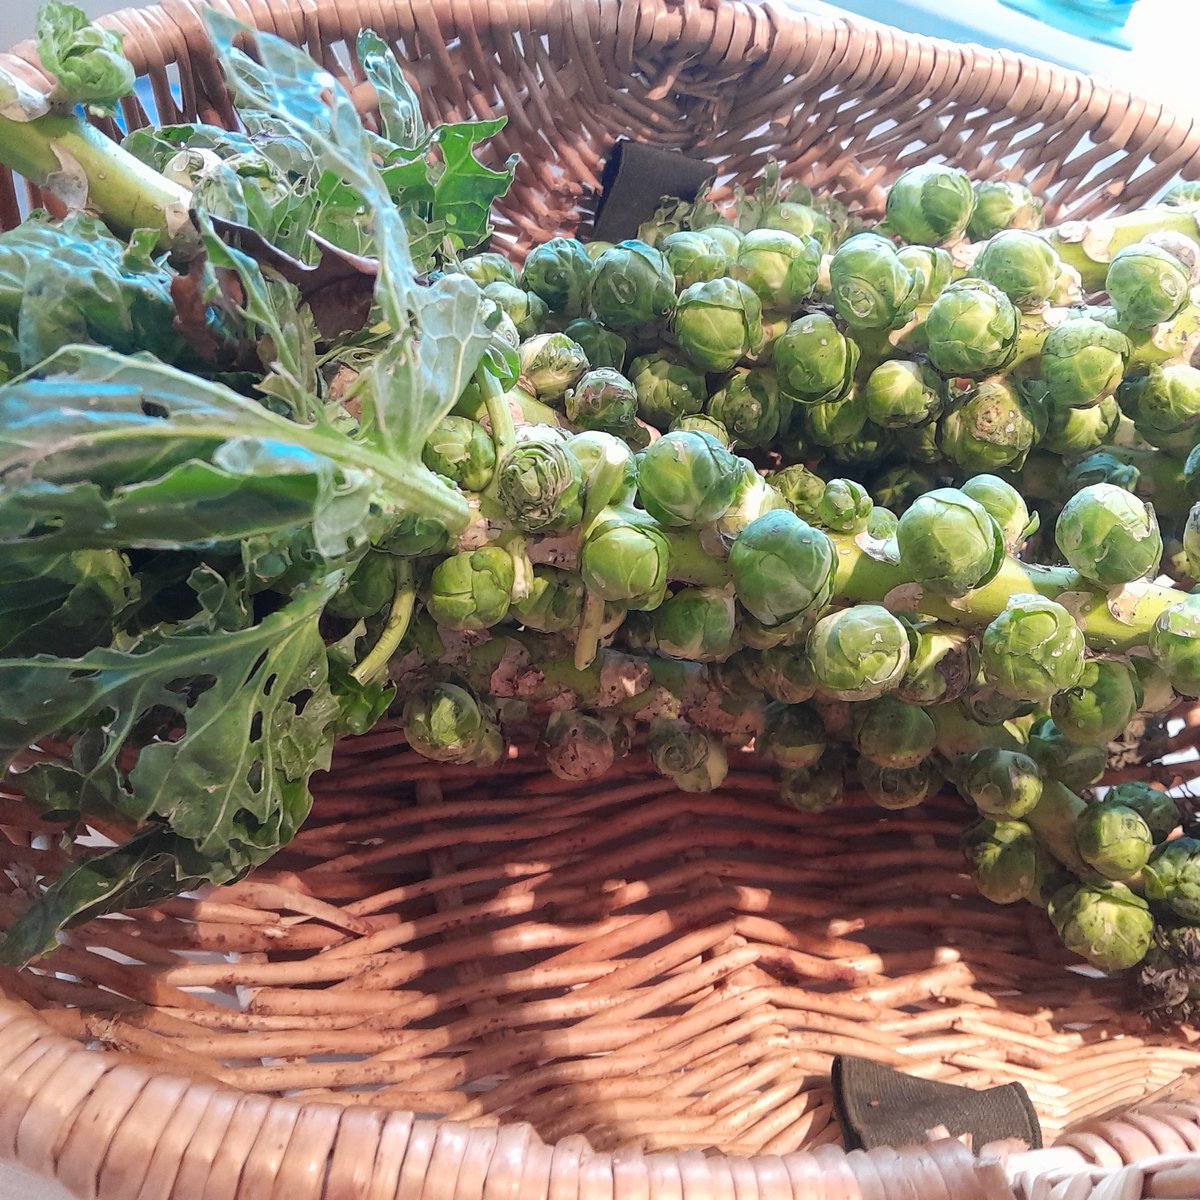 Not quite so cold today, so managed to pick some sprouts from the garden